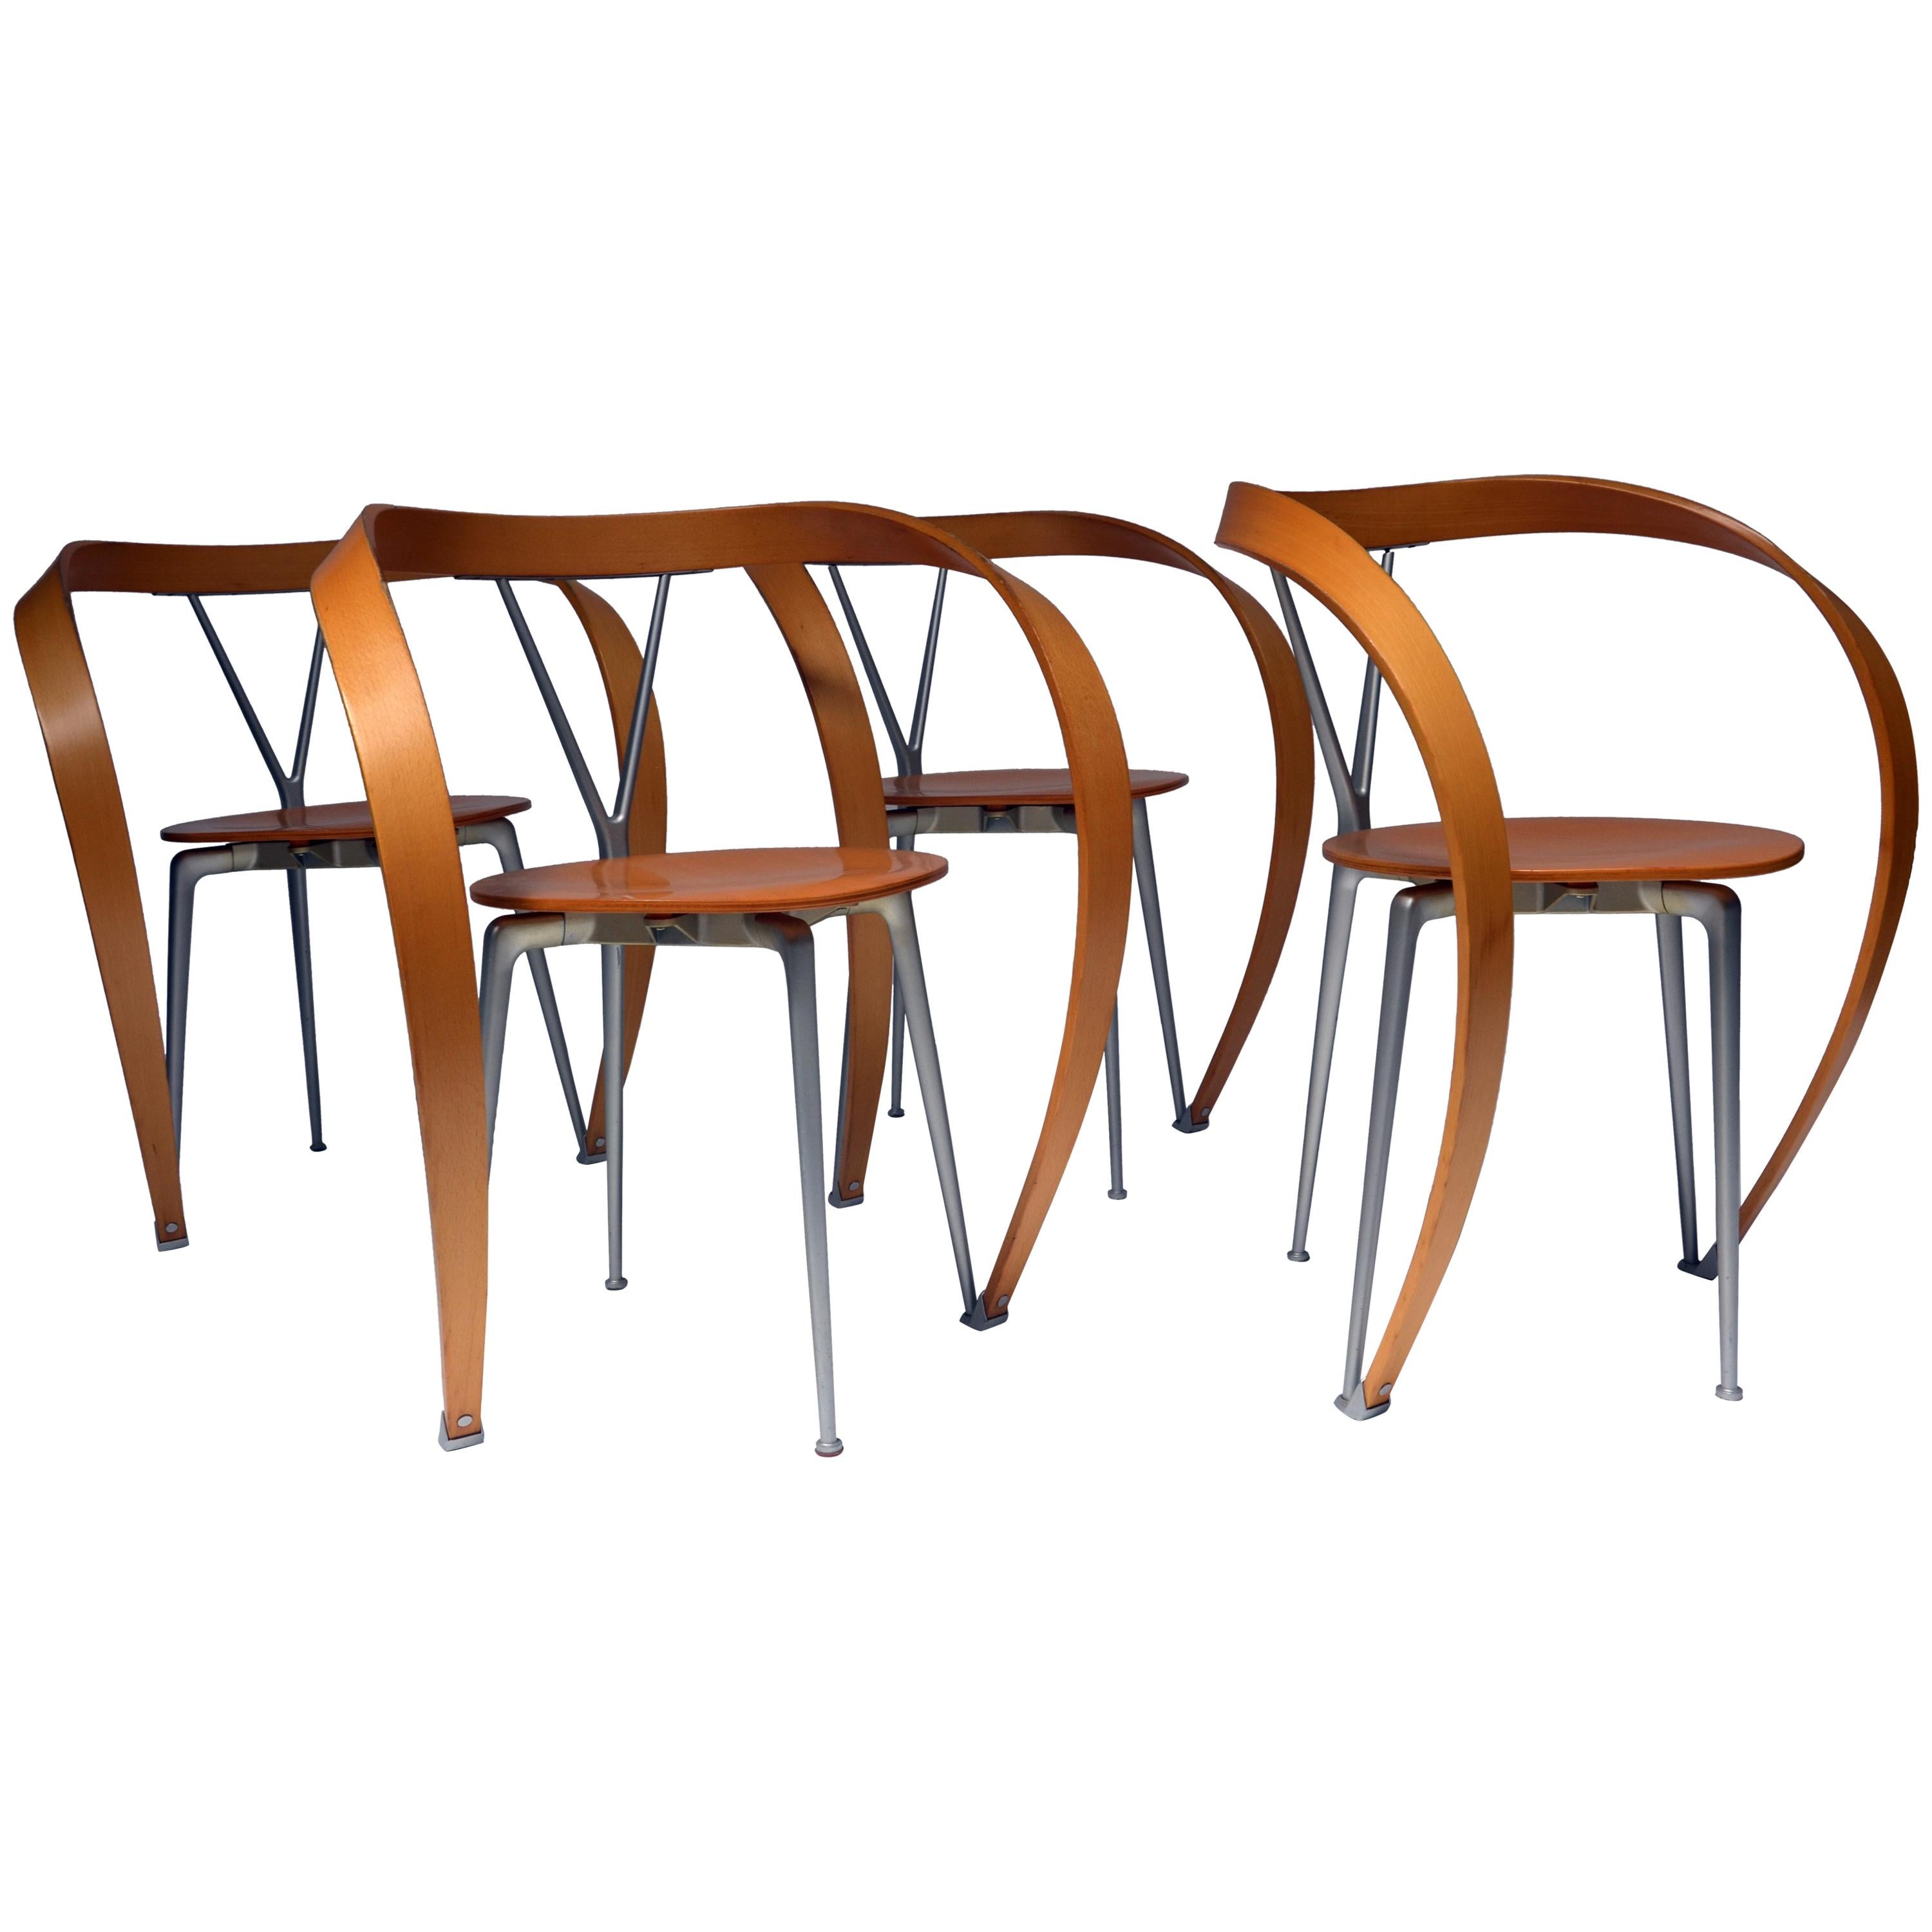 Set of Four Revers Chairs, Andrea Branzi for Cassina, 1993